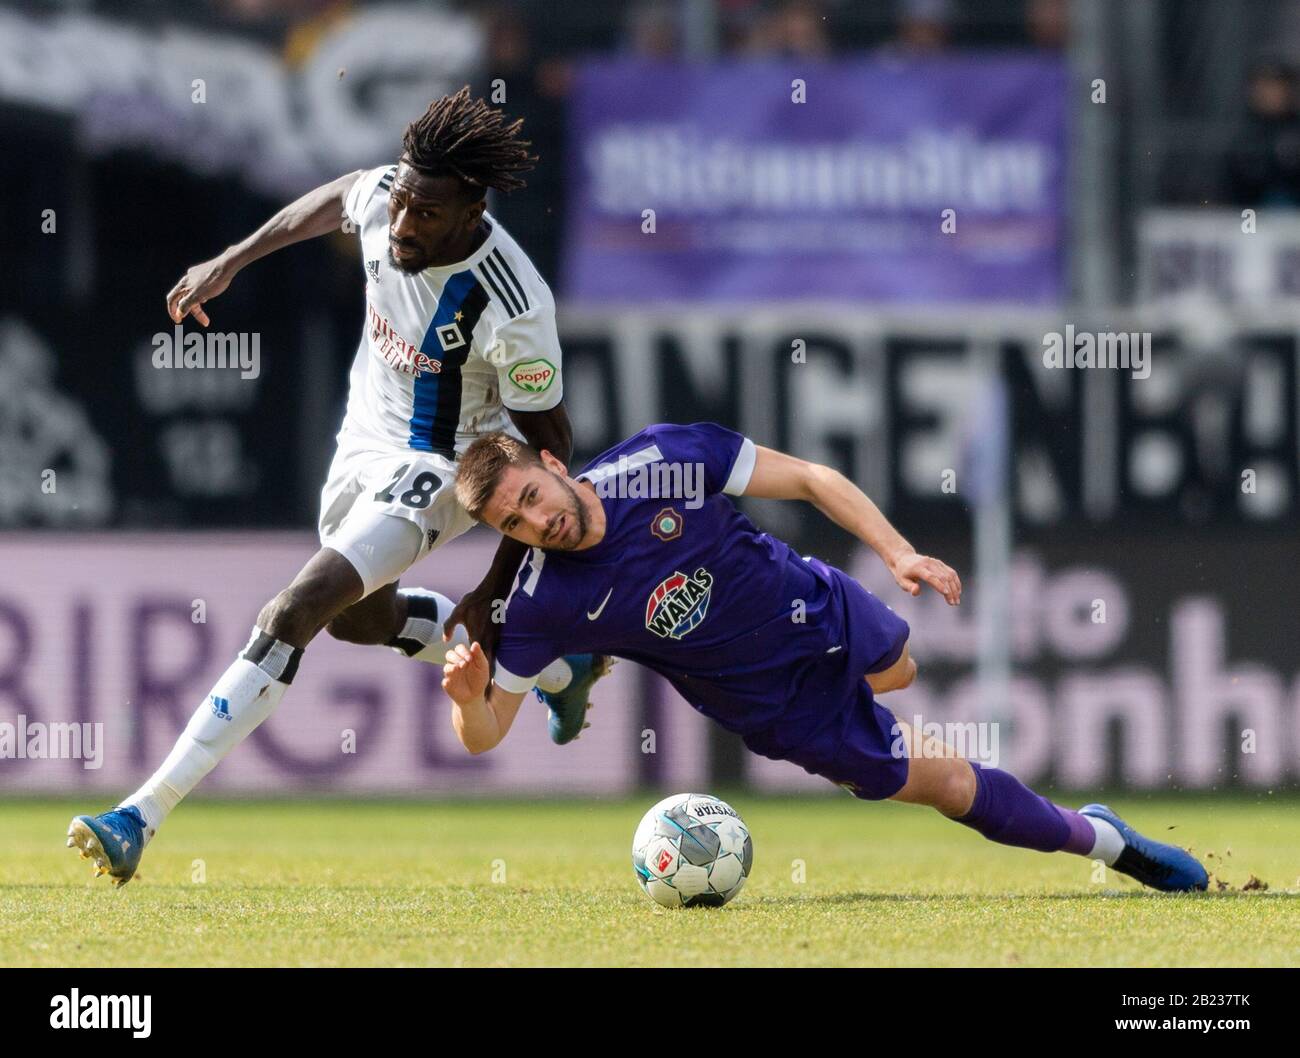 Aue, Germany. 29th Feb, 2020. Football: 2nd Bundesliga, FC Erzgebirge Aue - Hamburger SV, 24th matchday, at the Sparkassen-Erzgebirgsstadion. Aues Marko Mihojevic (r) against Hamburg's Bakery Jatta. Credit: Robert Michael/dpa-Zentralbild/dpa - IMPORTANT NOTE: In accordance with the regulations of the DFL Deutsche Fußball Liga and the DFB Deutscher Fußball-Bund, it is prohibited to exploit or have exploited in the stadium and/or from the game taken photographs in the form of sequence images and/or video-like photo series./dpa/Alamy Live News Credit: dpa picture alliance/Alamy Live News Stock Photo